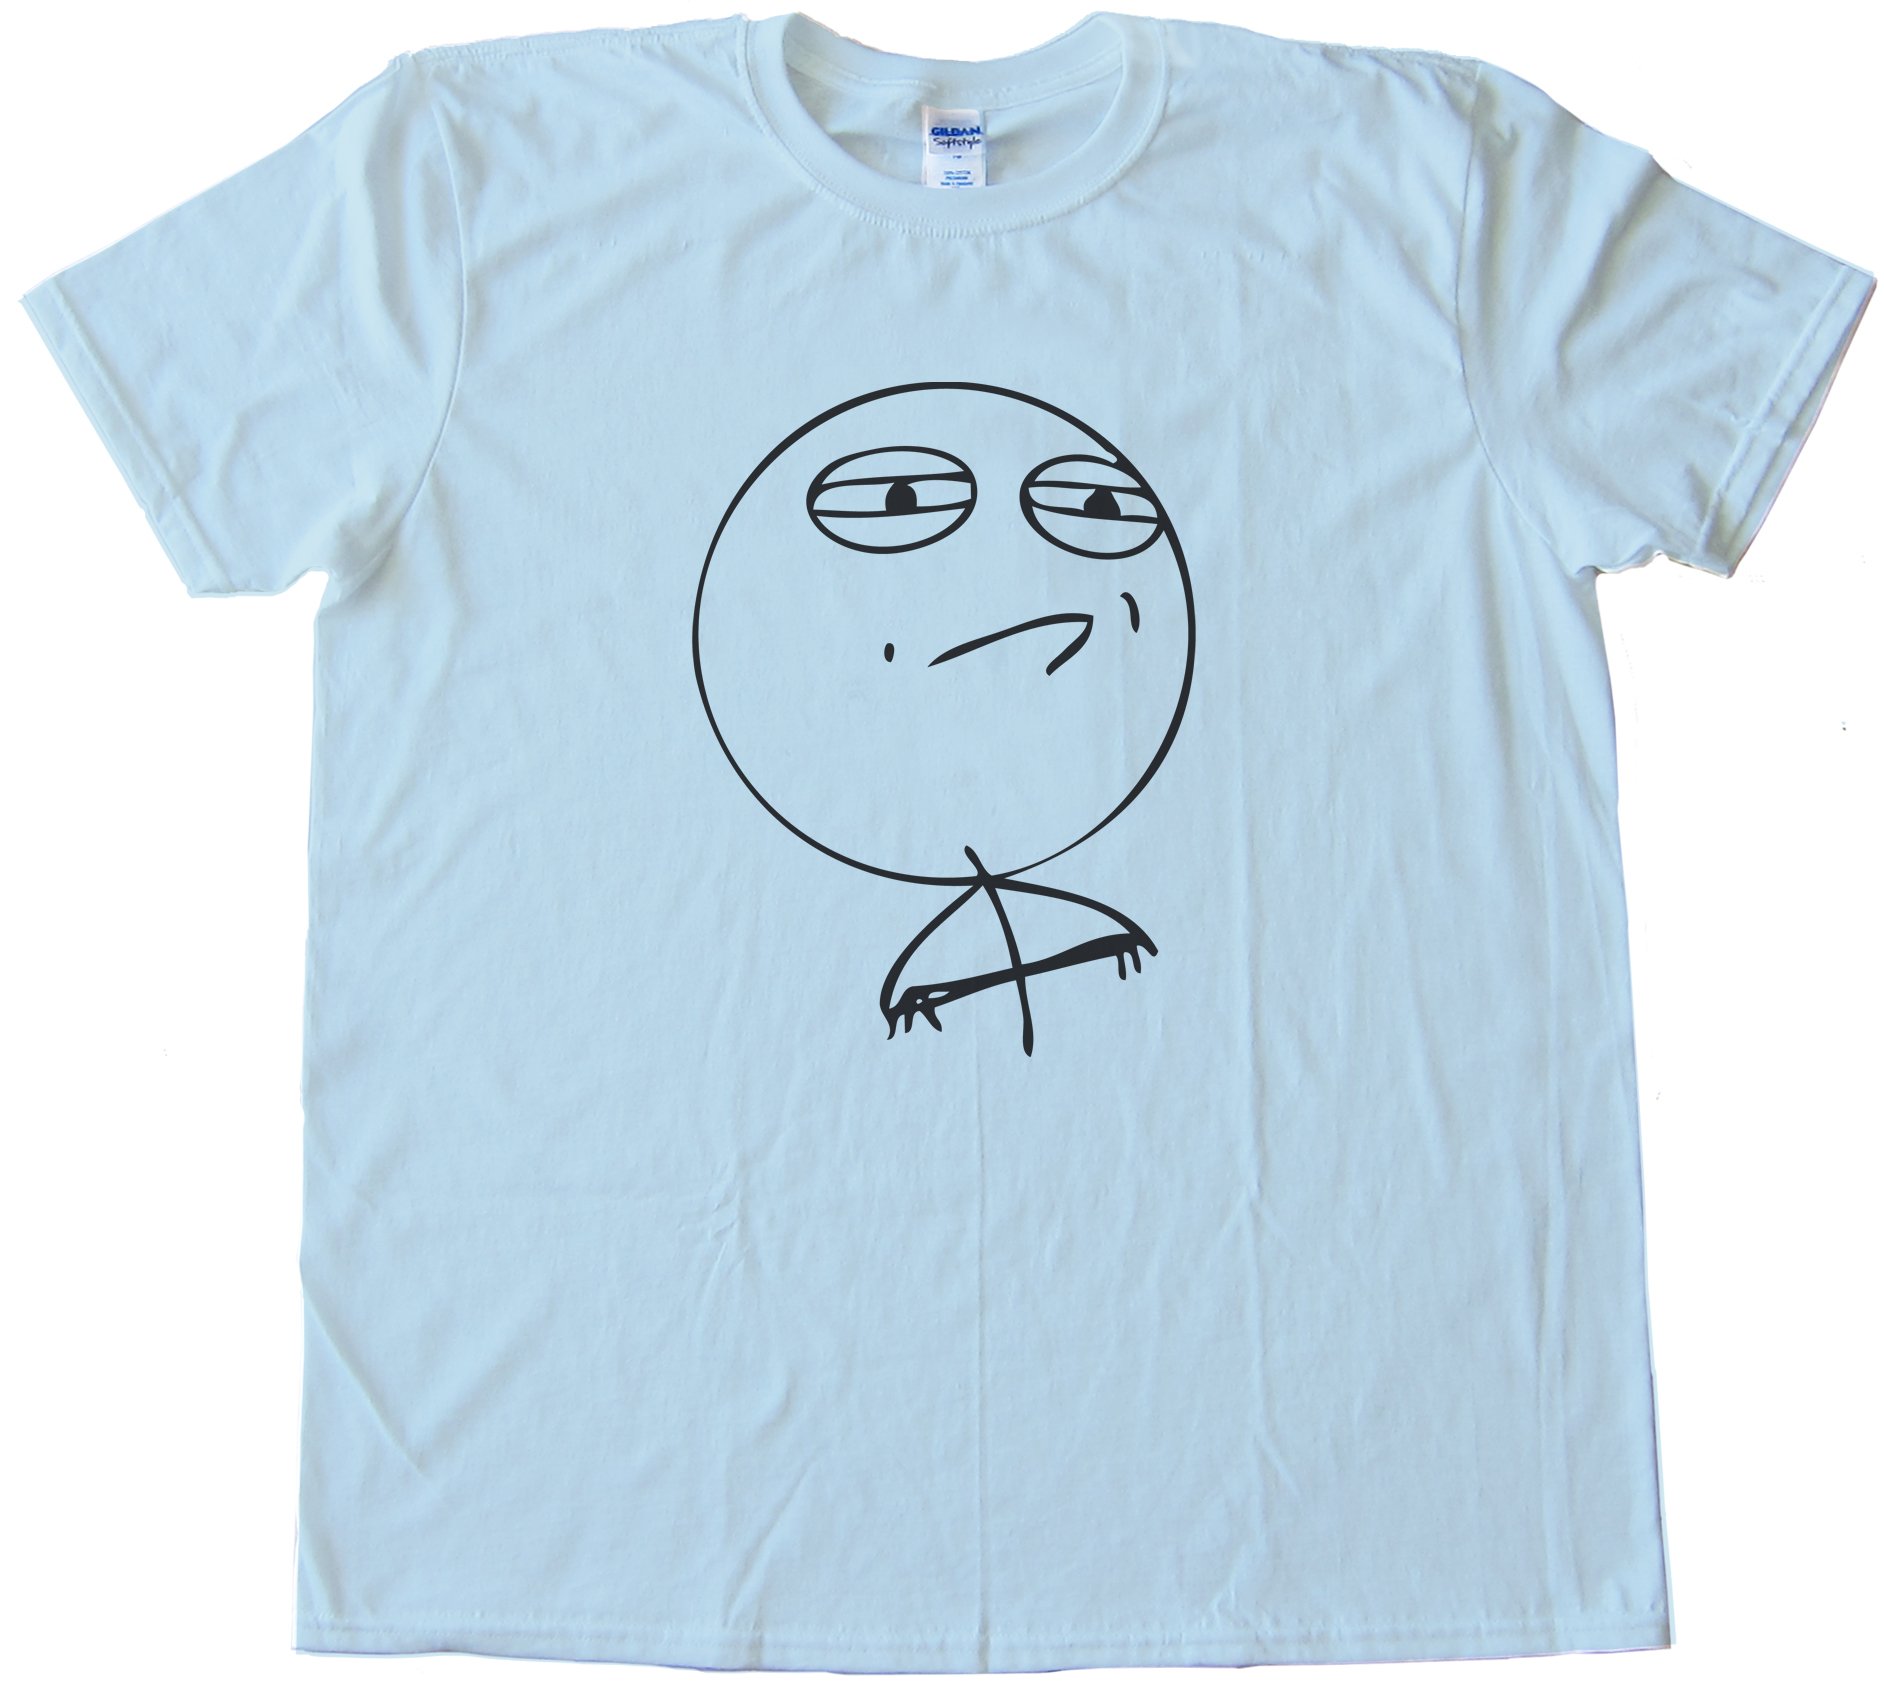 Challenge Accepted Rage Face Shirt Tee Shirt